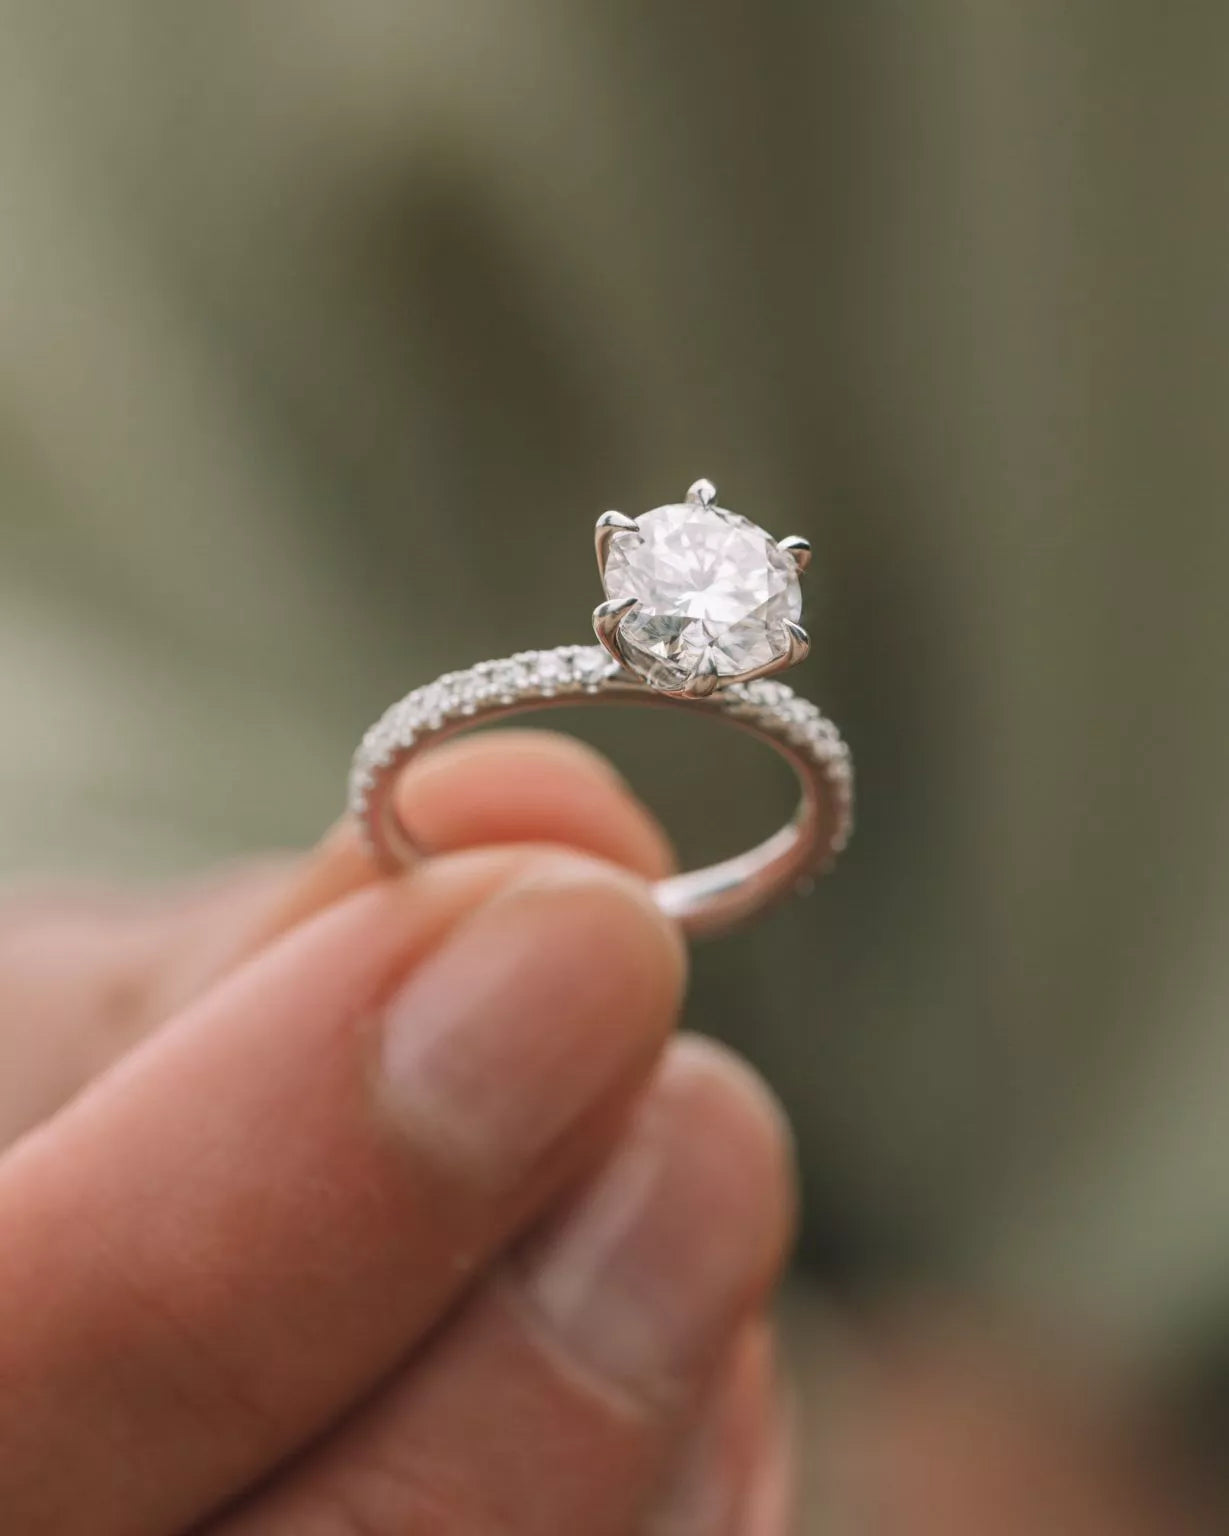 Buy Engagement Ring, Diamond Jewelry, Create Your Own - Friendly Diamonds